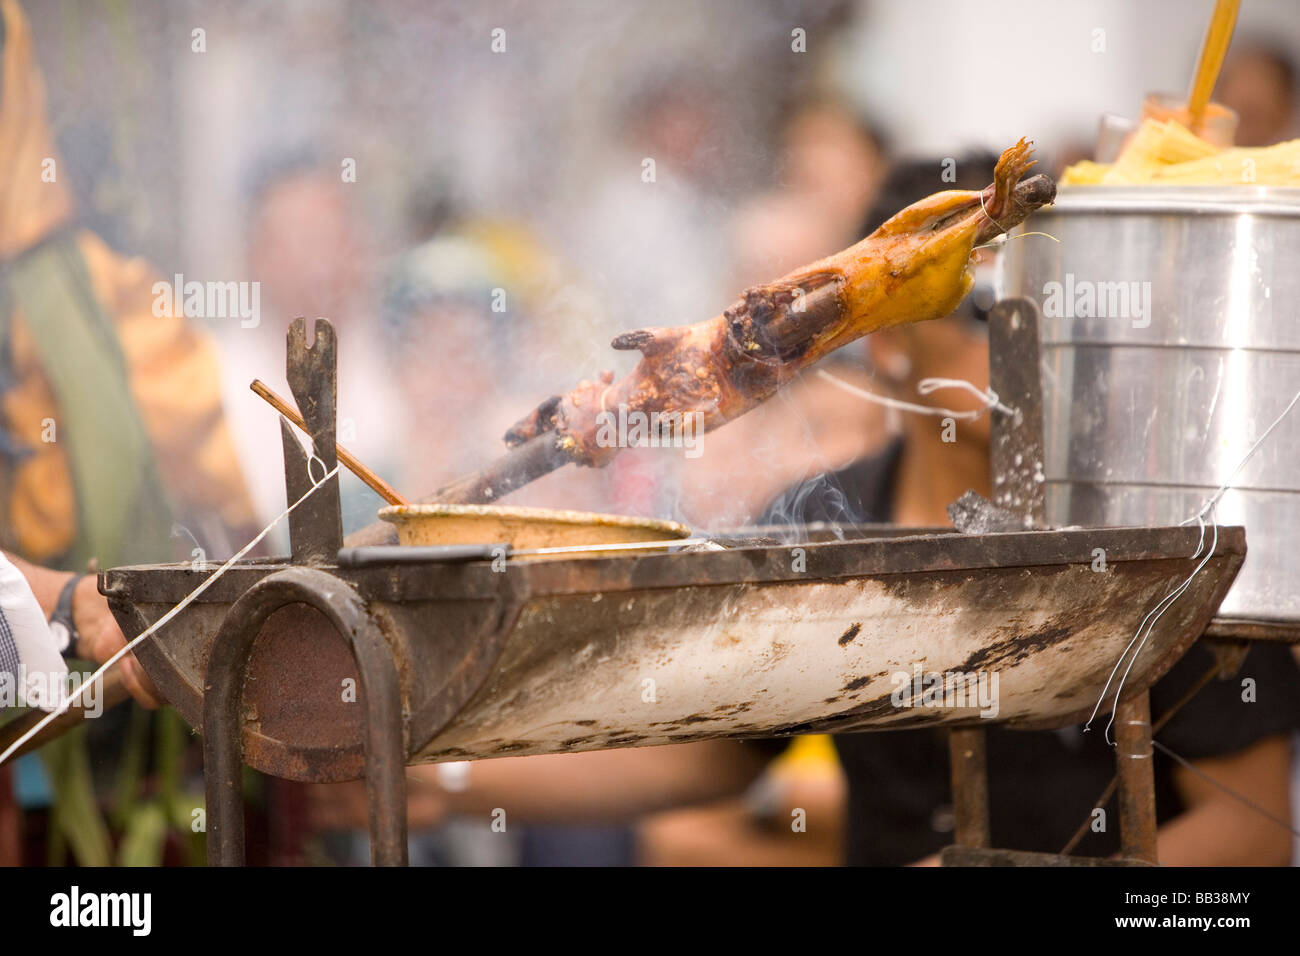 South America, Ecuador, Cuenca.  Cuy  roasting on spit in annual parade & festival to celebrate founding of Cuenca in 1557. Stock Photo